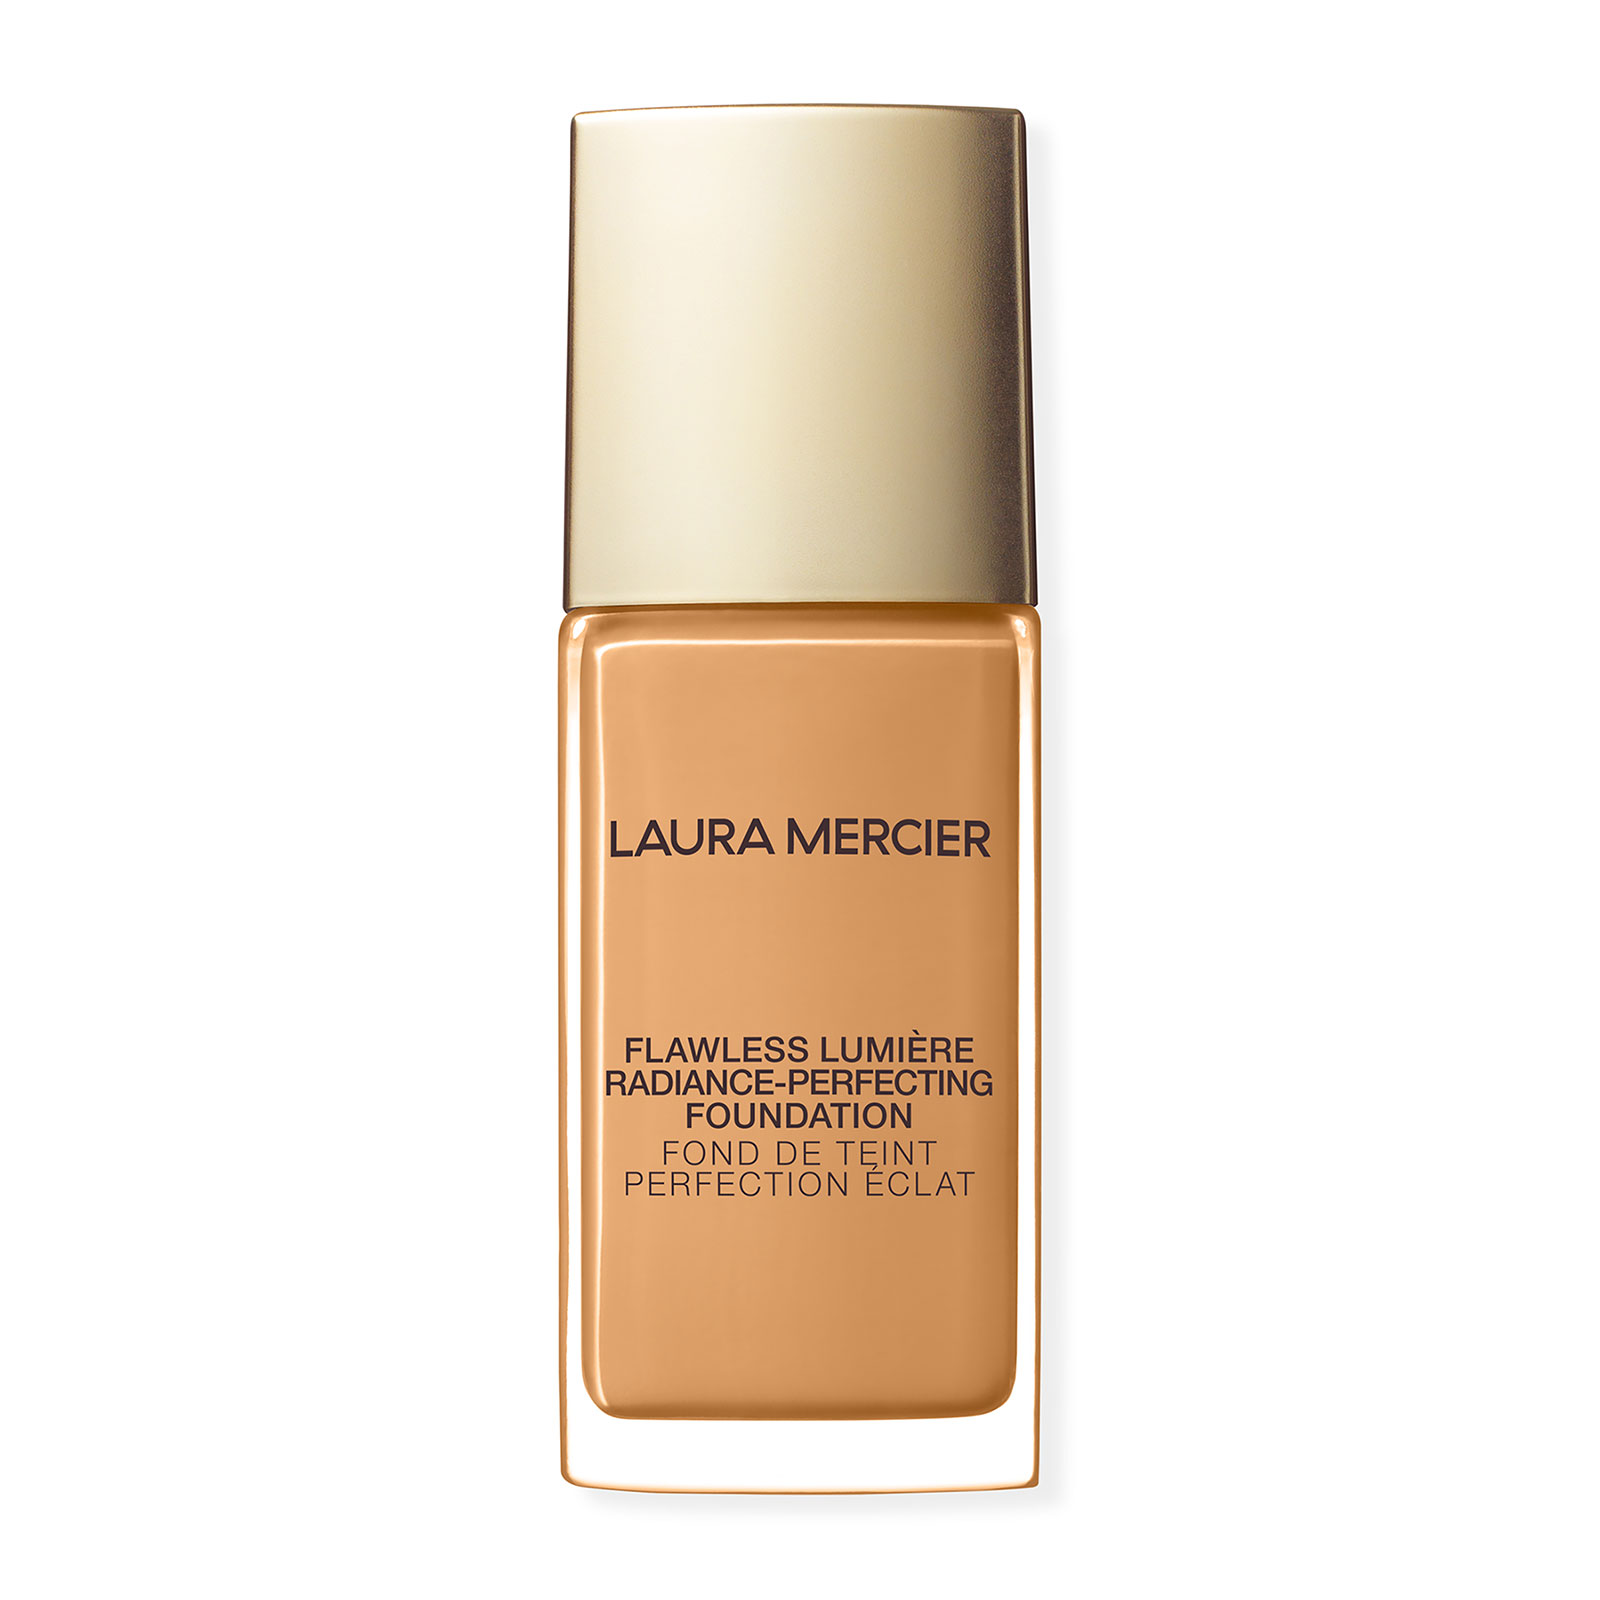 Laura Mercier Flawless Lumiere Radiance-Perfecting Foundation 30Ml 2W1.5 Bisque